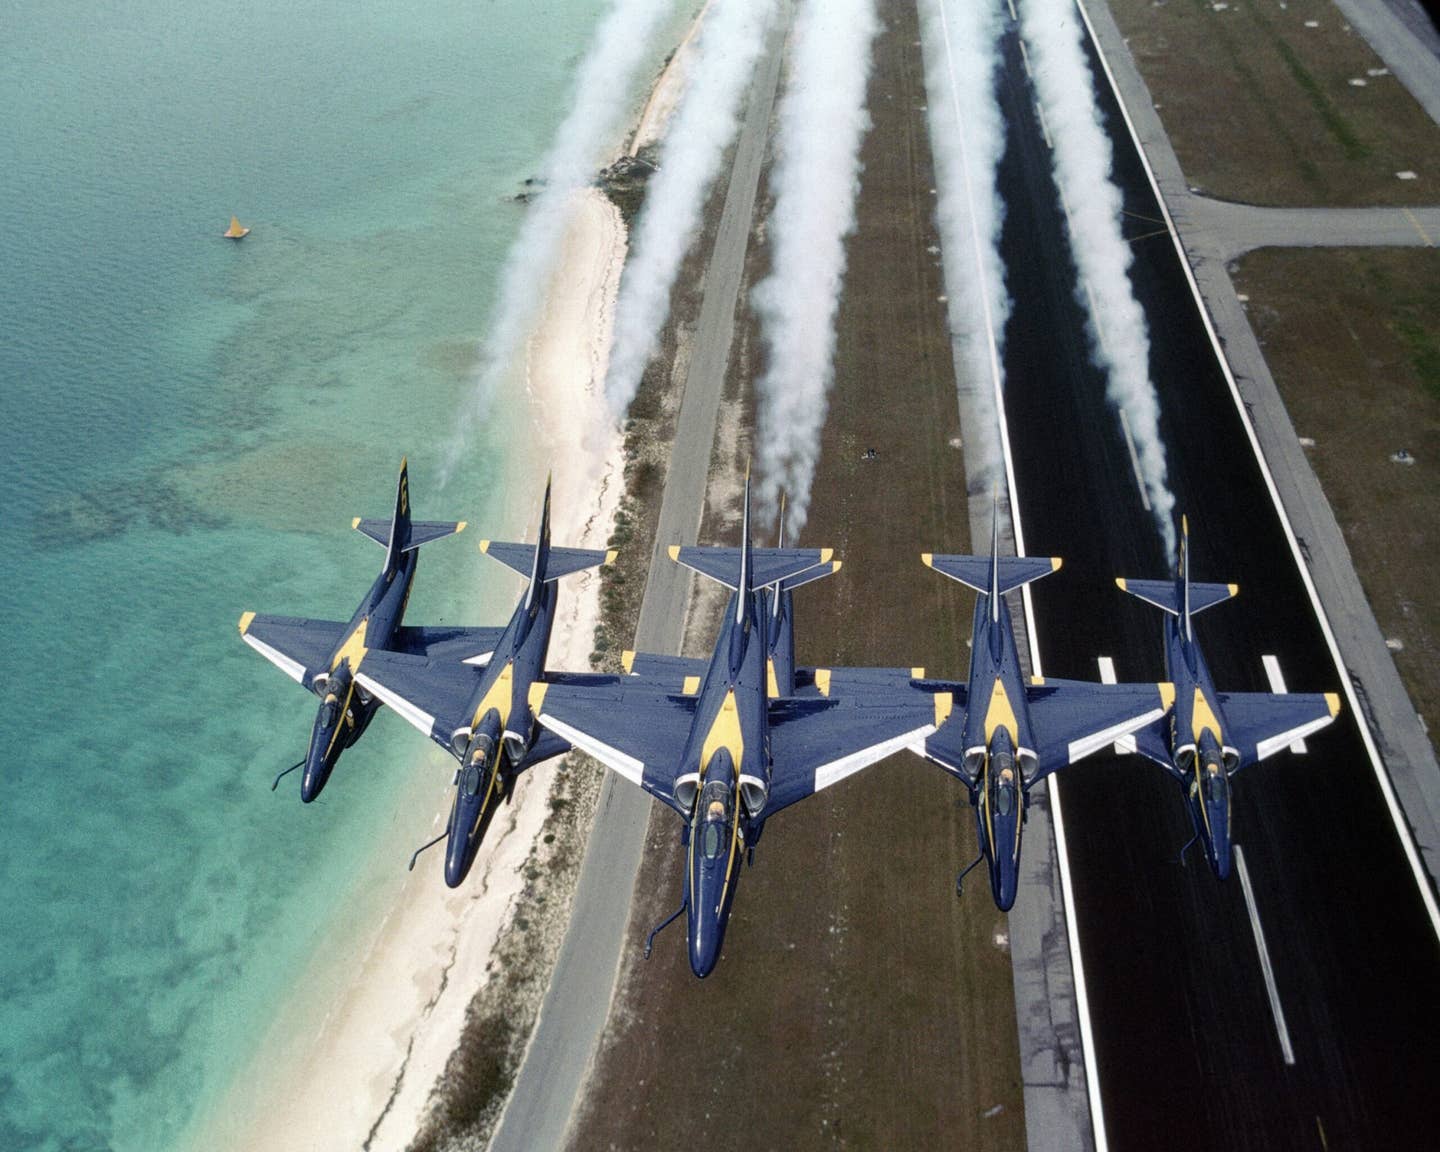 The six A-4Fs of the U.S. Navy Blue Angels flight demonstration in a tight wedge formation, in July 1984. <em>U.S. Navy</em>